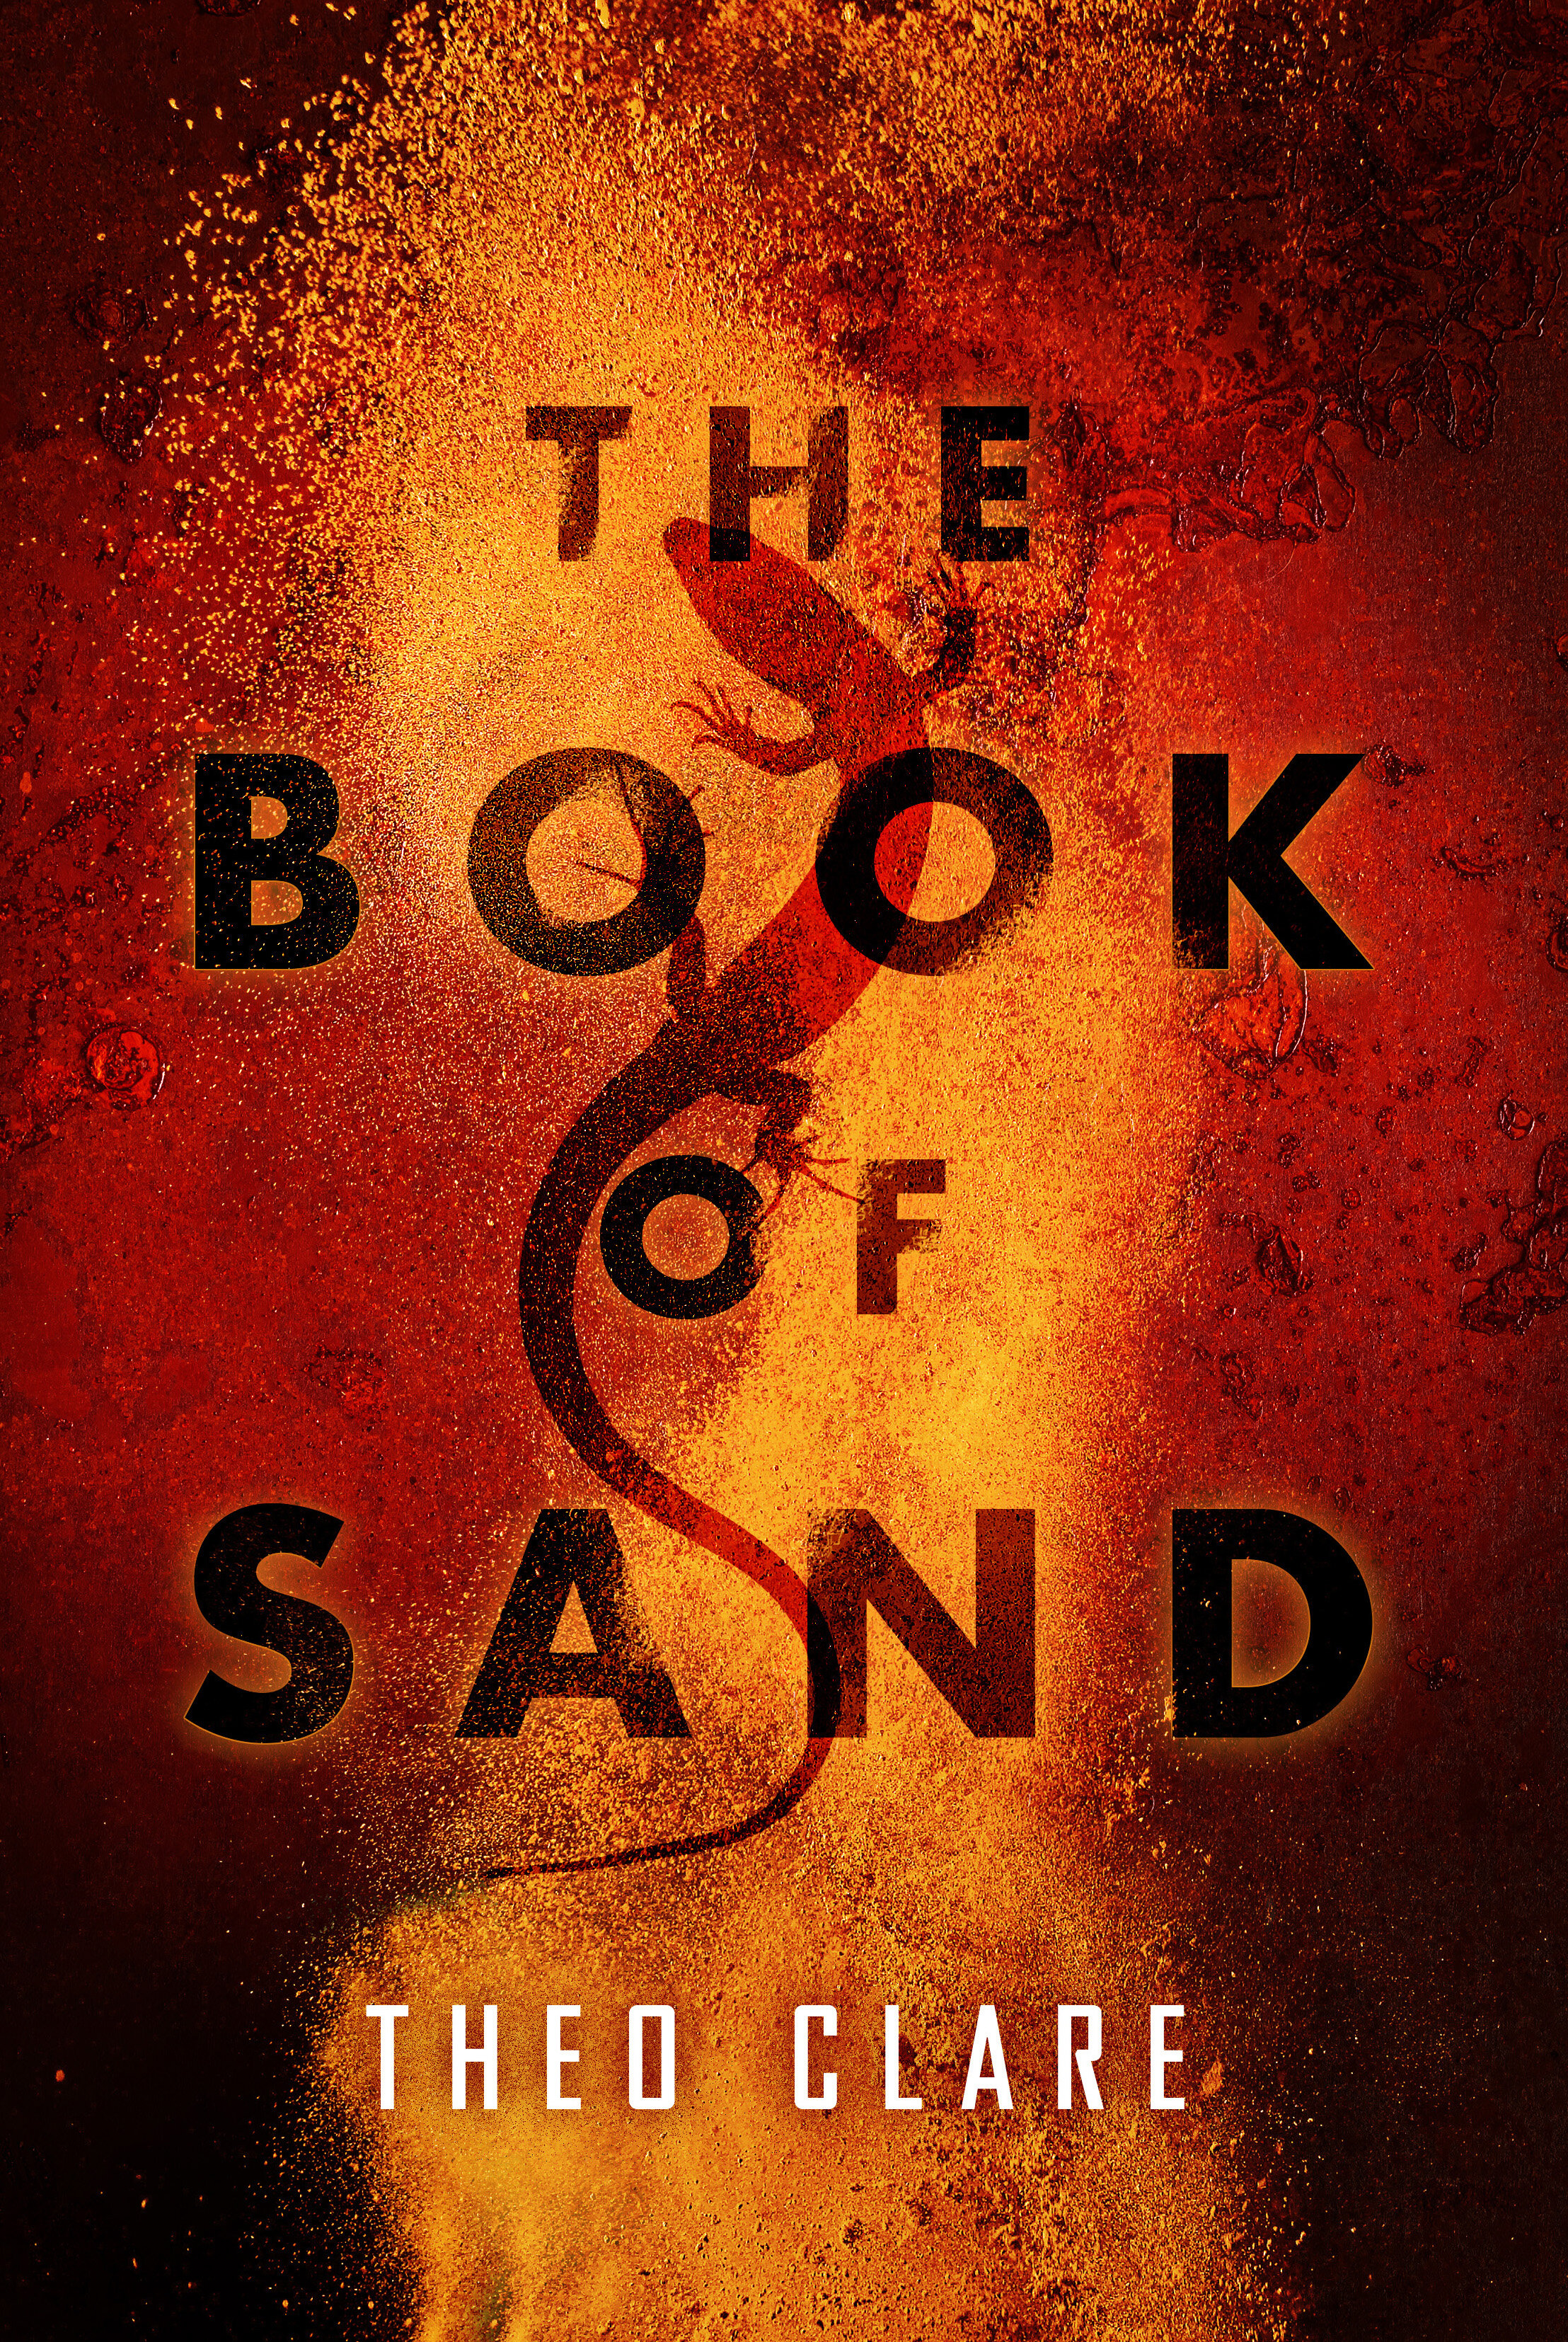 THE BOOK OF SAND .jpg